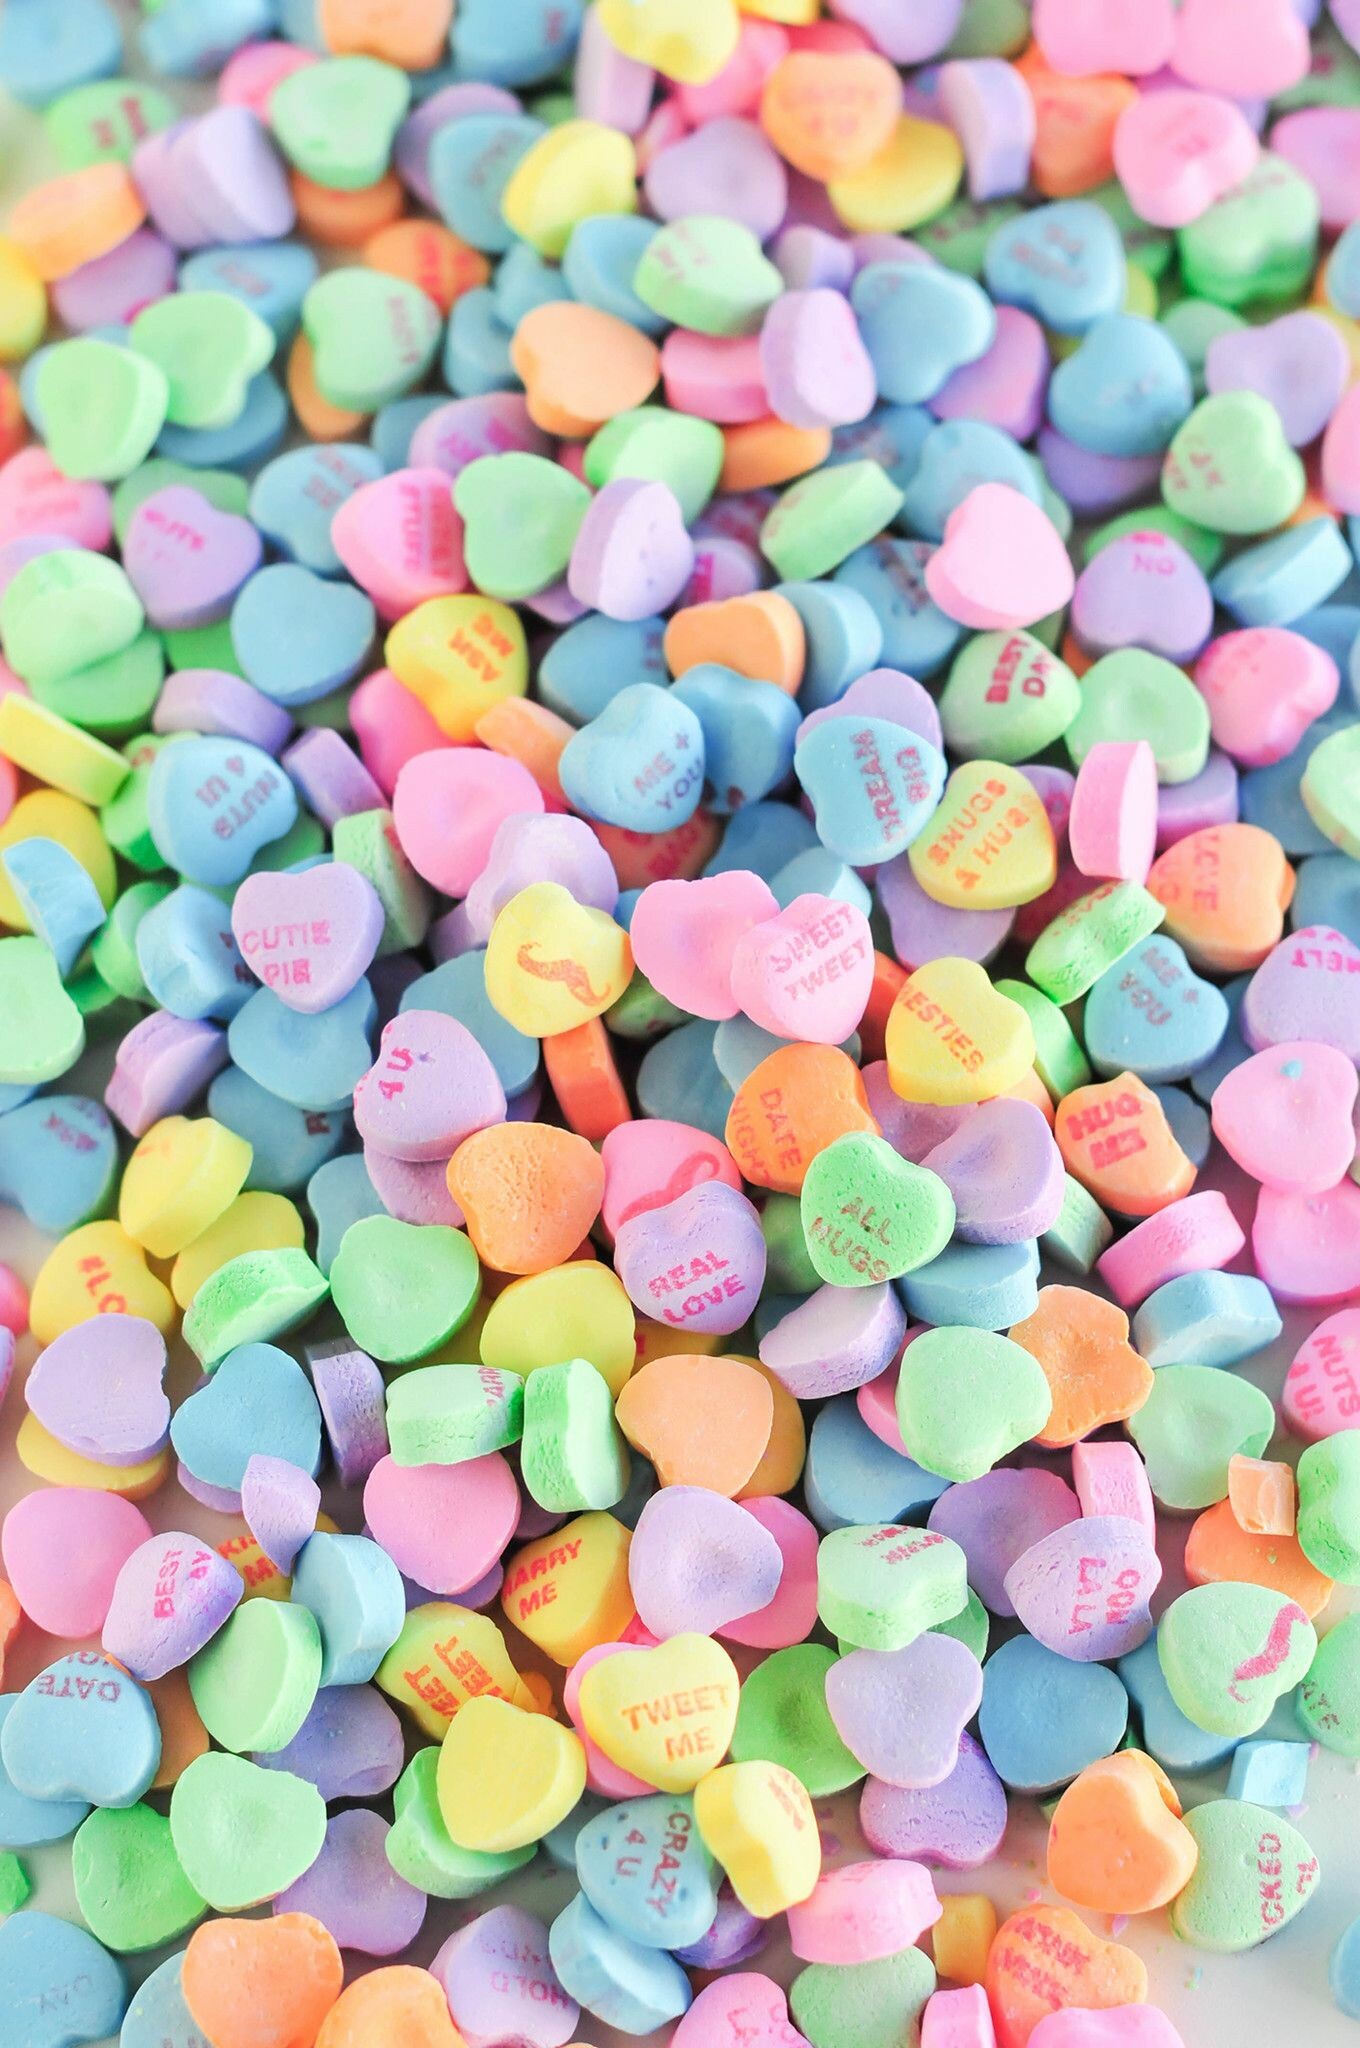 Sweets: Conversation hearts, The Valentine's Day candy. 1360x2050 HD Wallpaper.